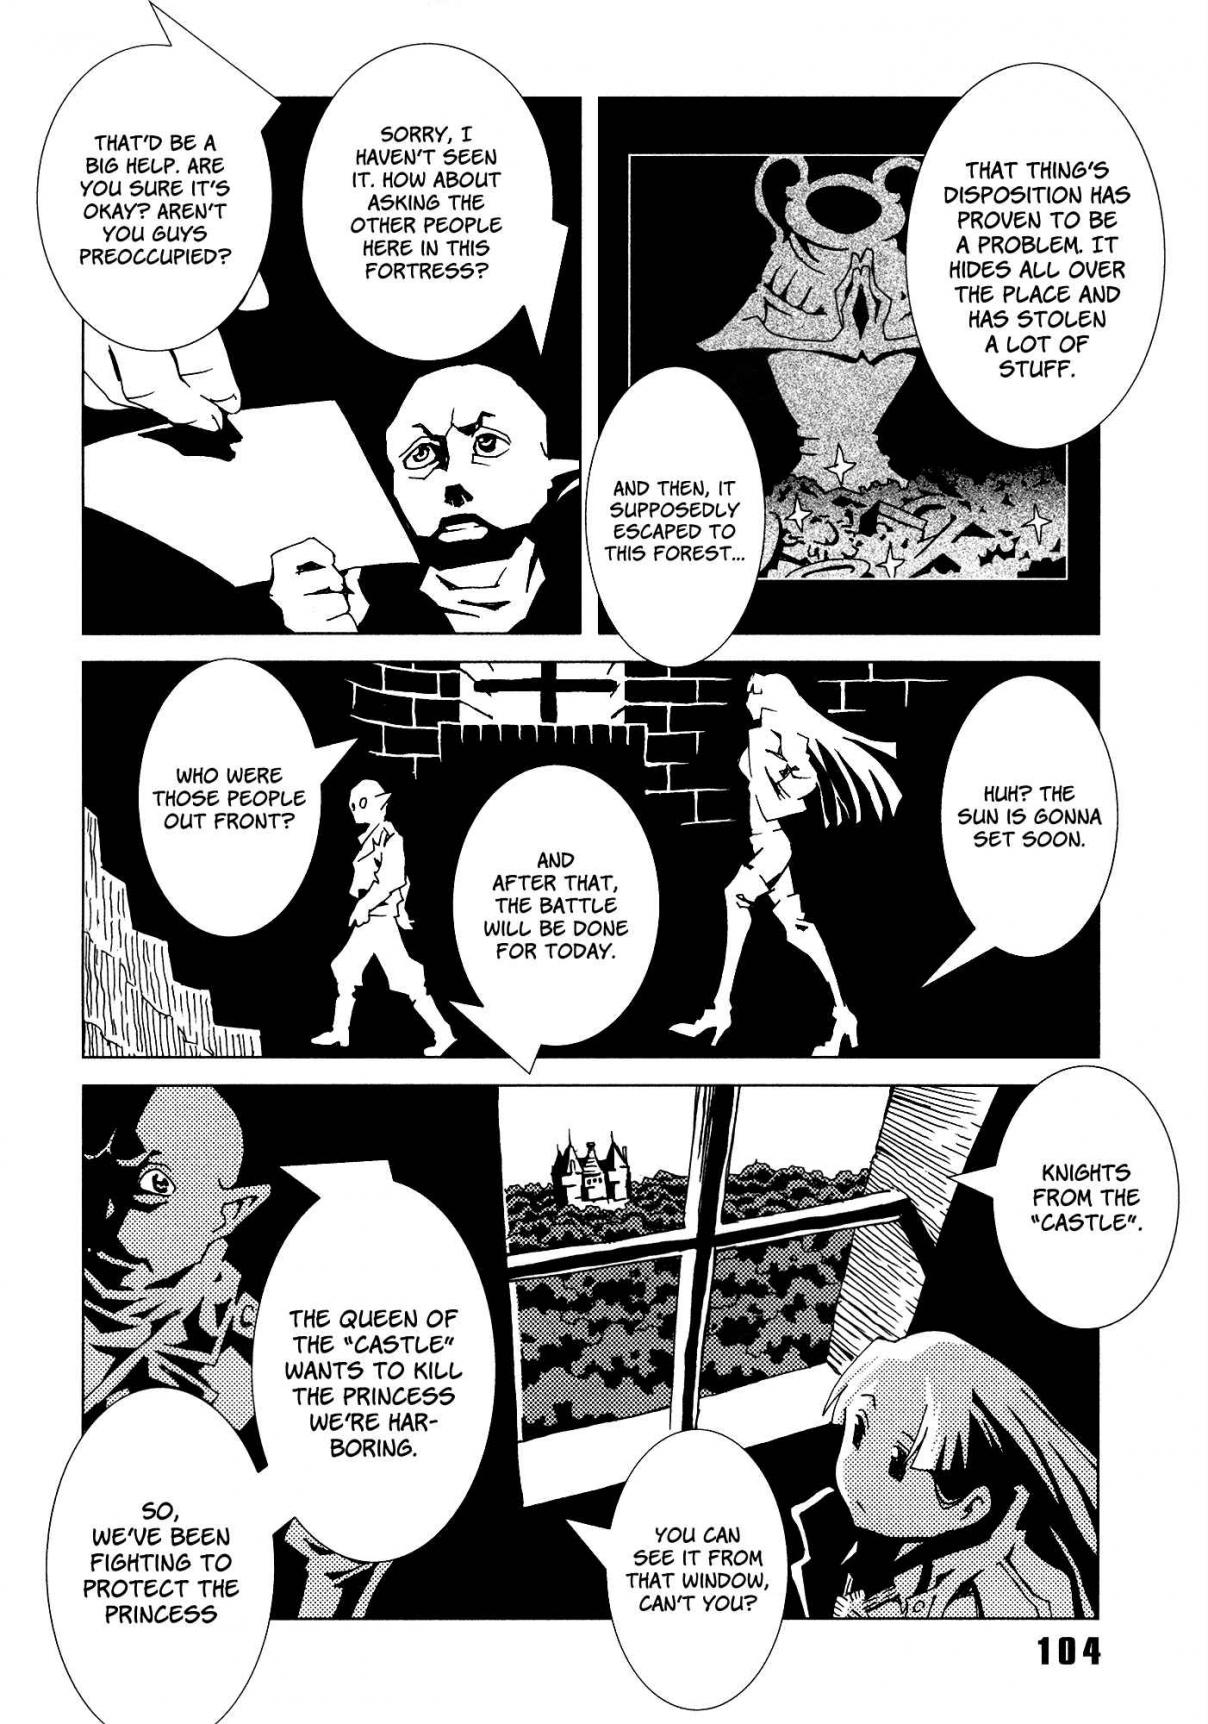 Area 51 Vol. 4 Ch. 15 You Guys Still Doing Situation for 800 Years?